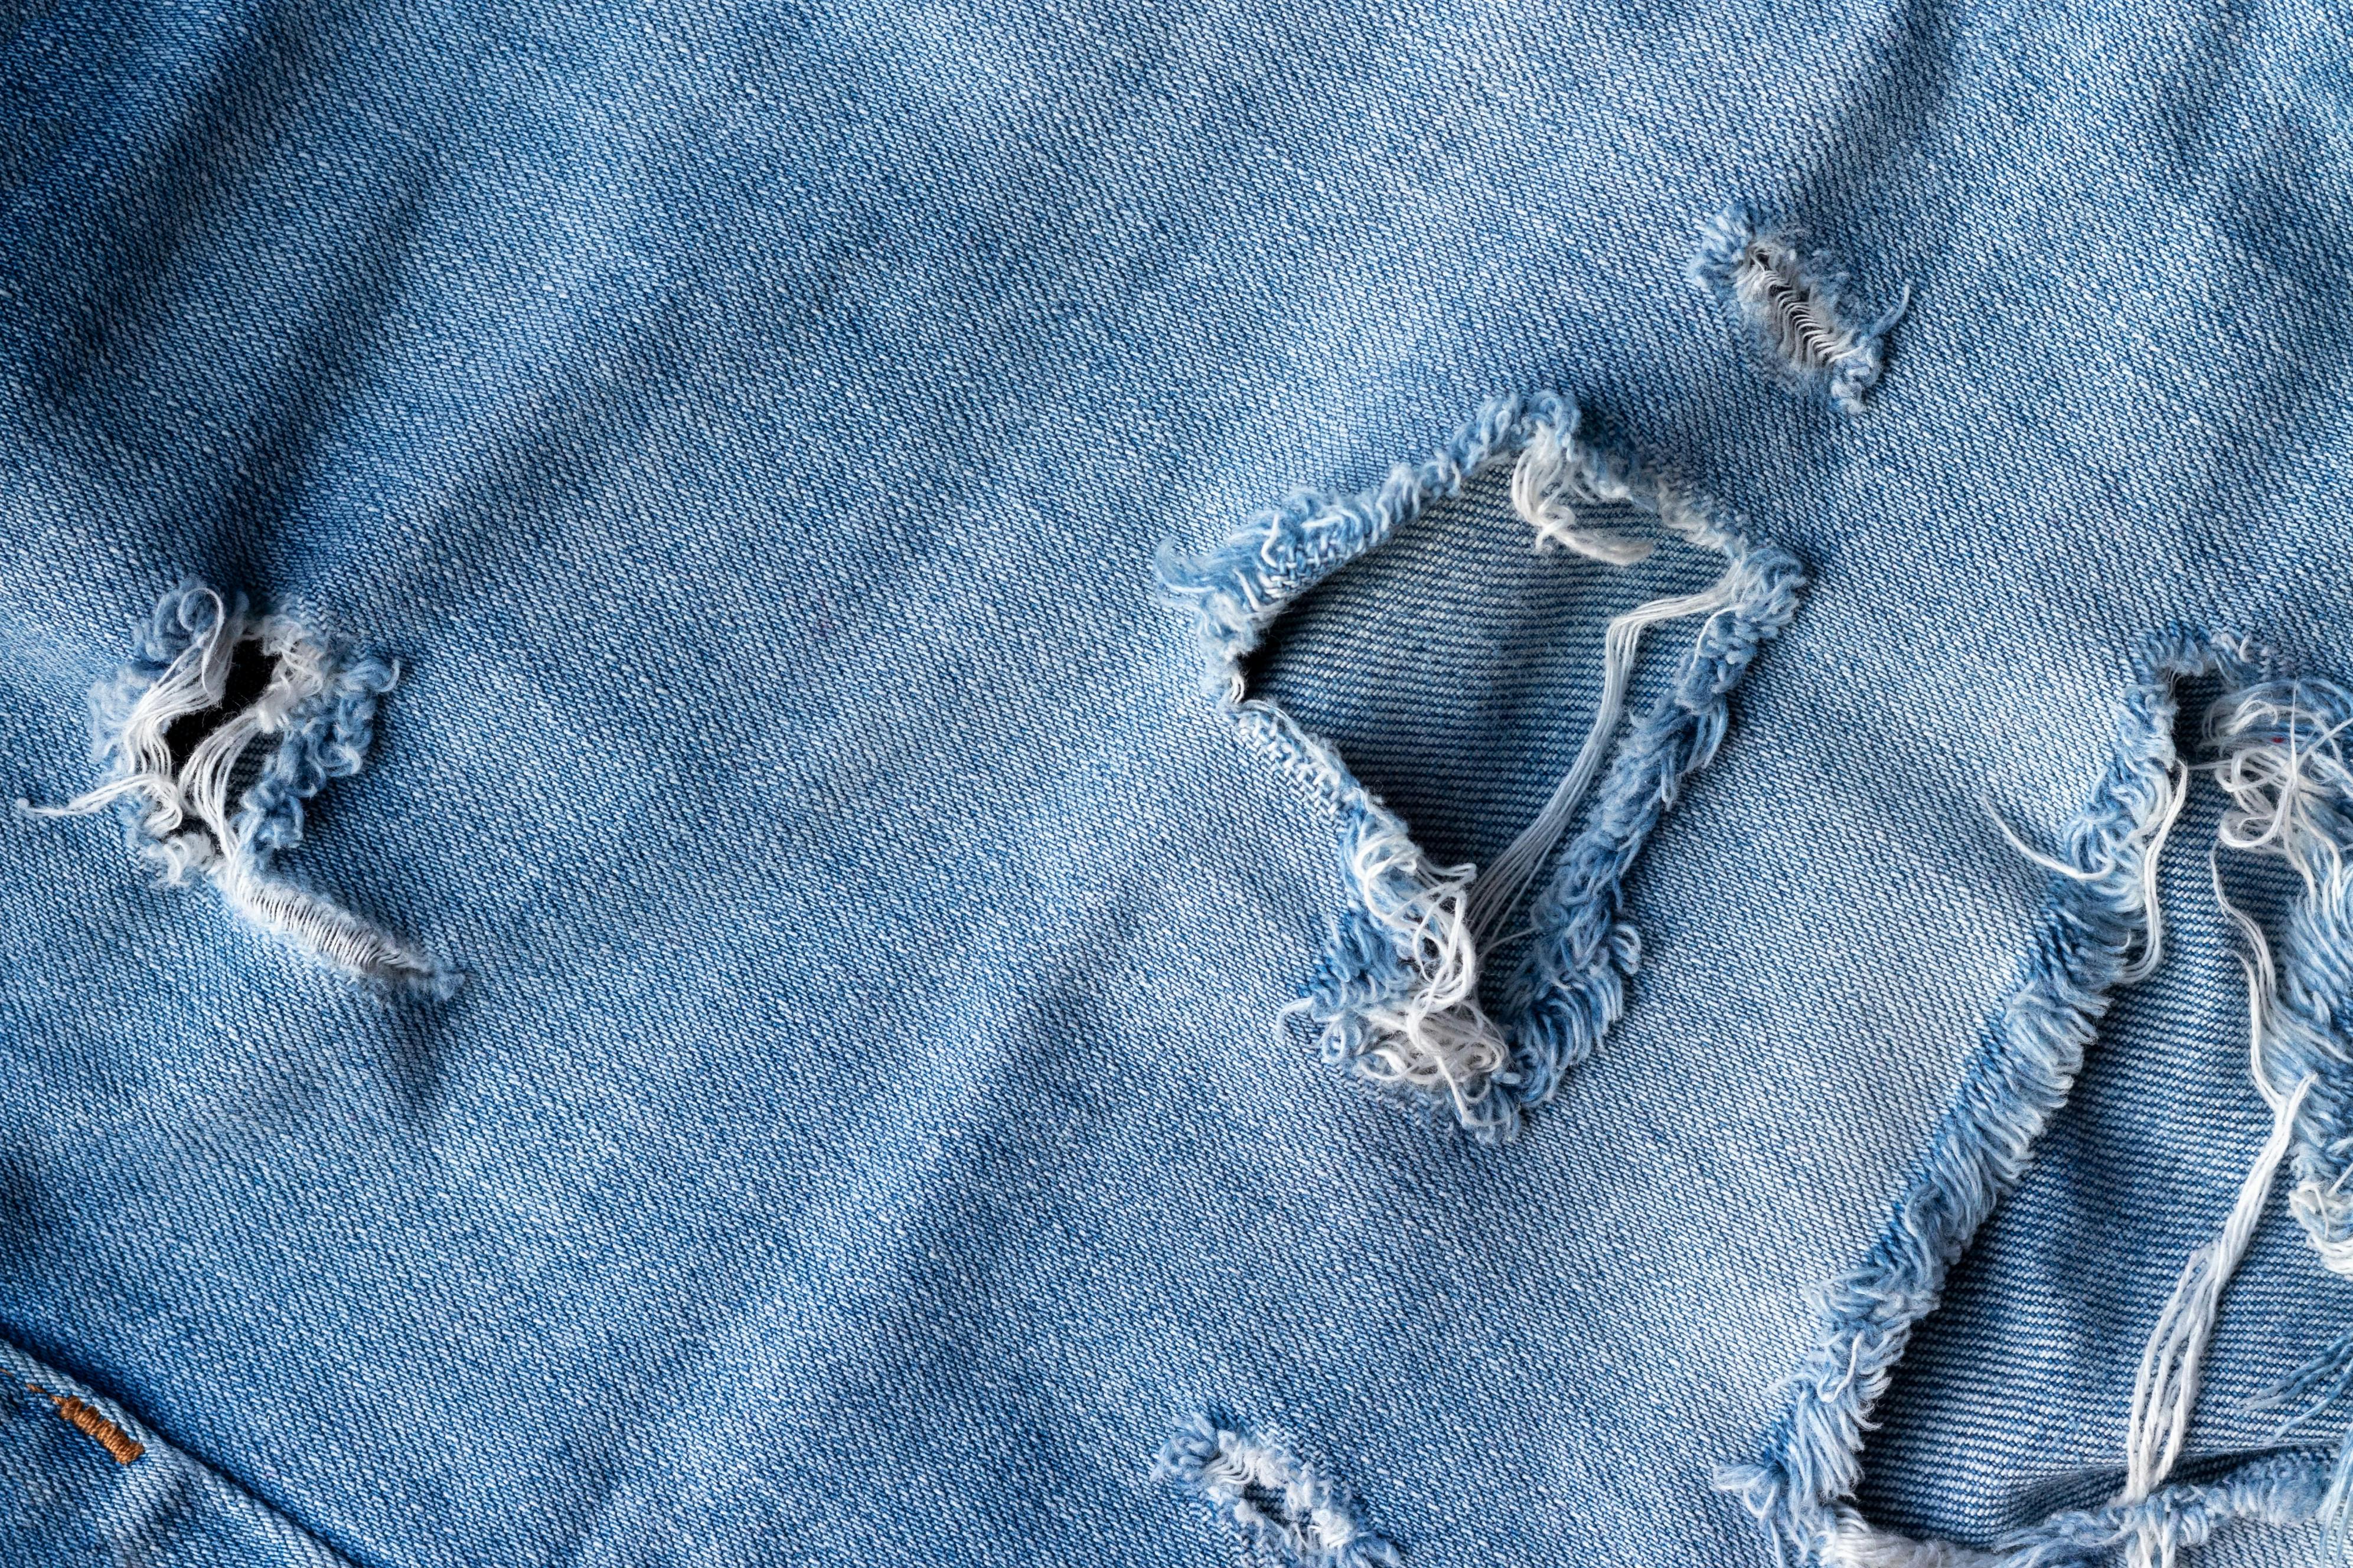 close up photograph of distressed blue jeans